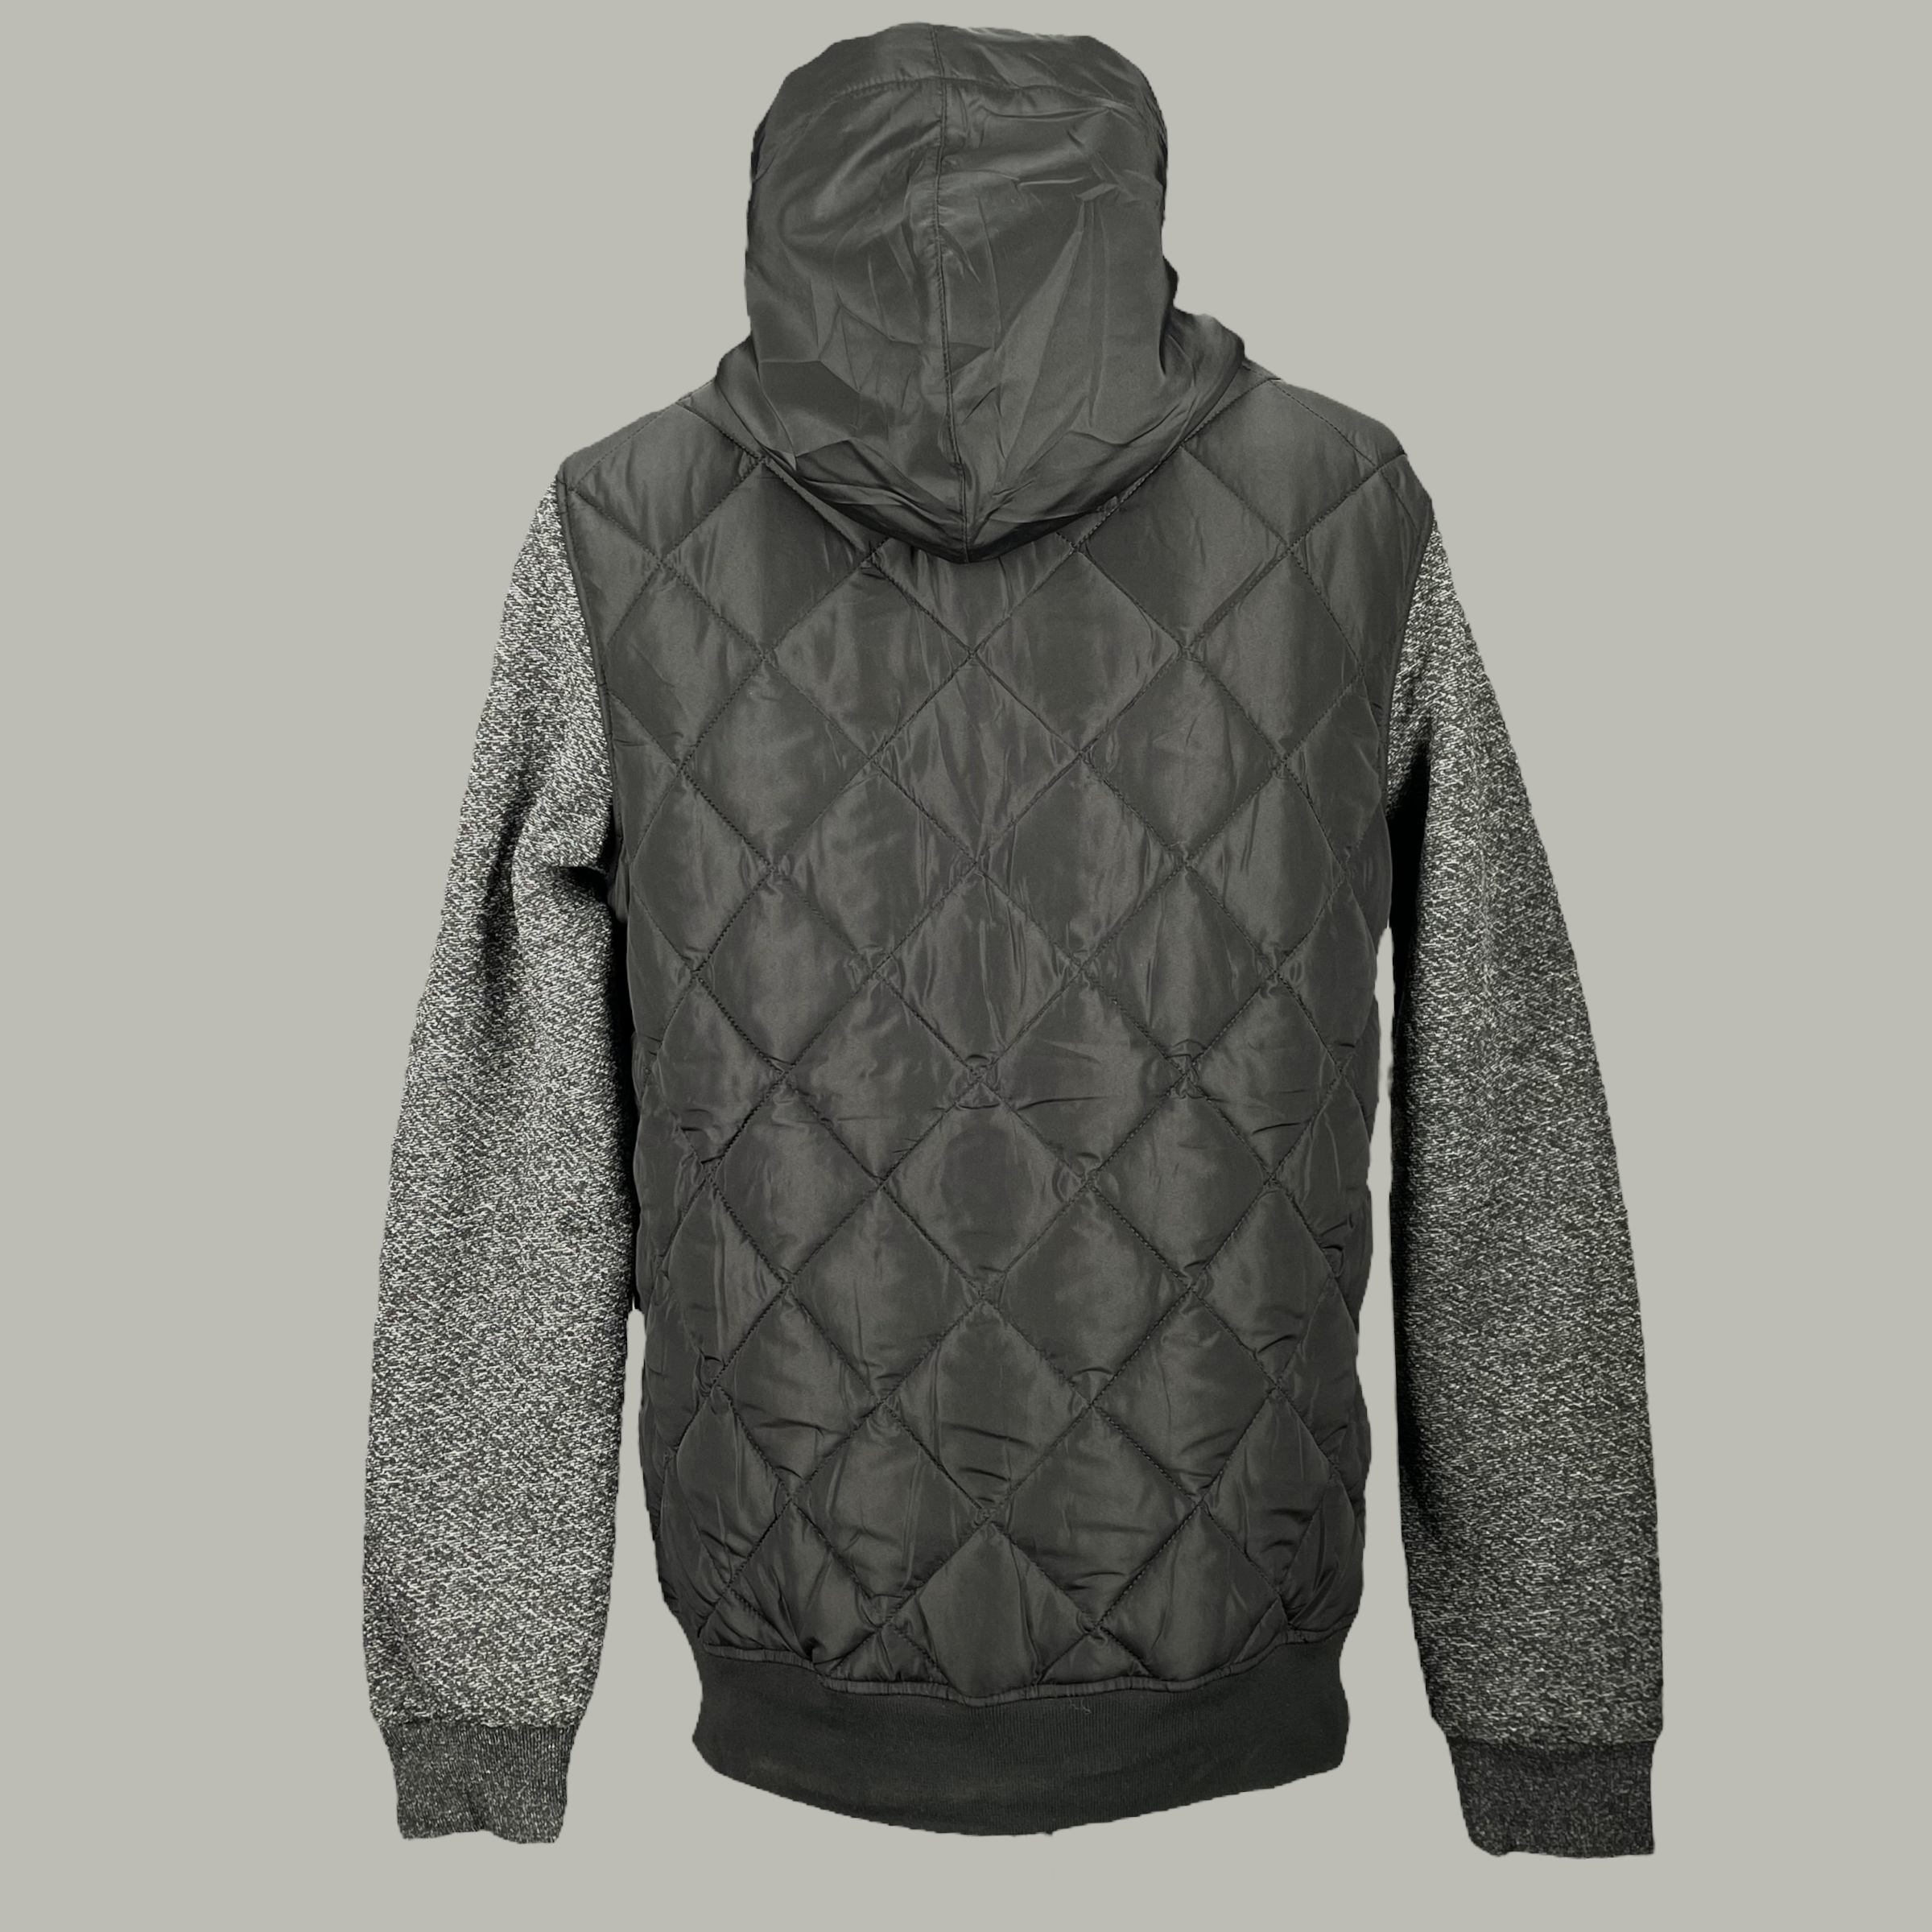 MS100-436 GREY HOODY WITH CORD